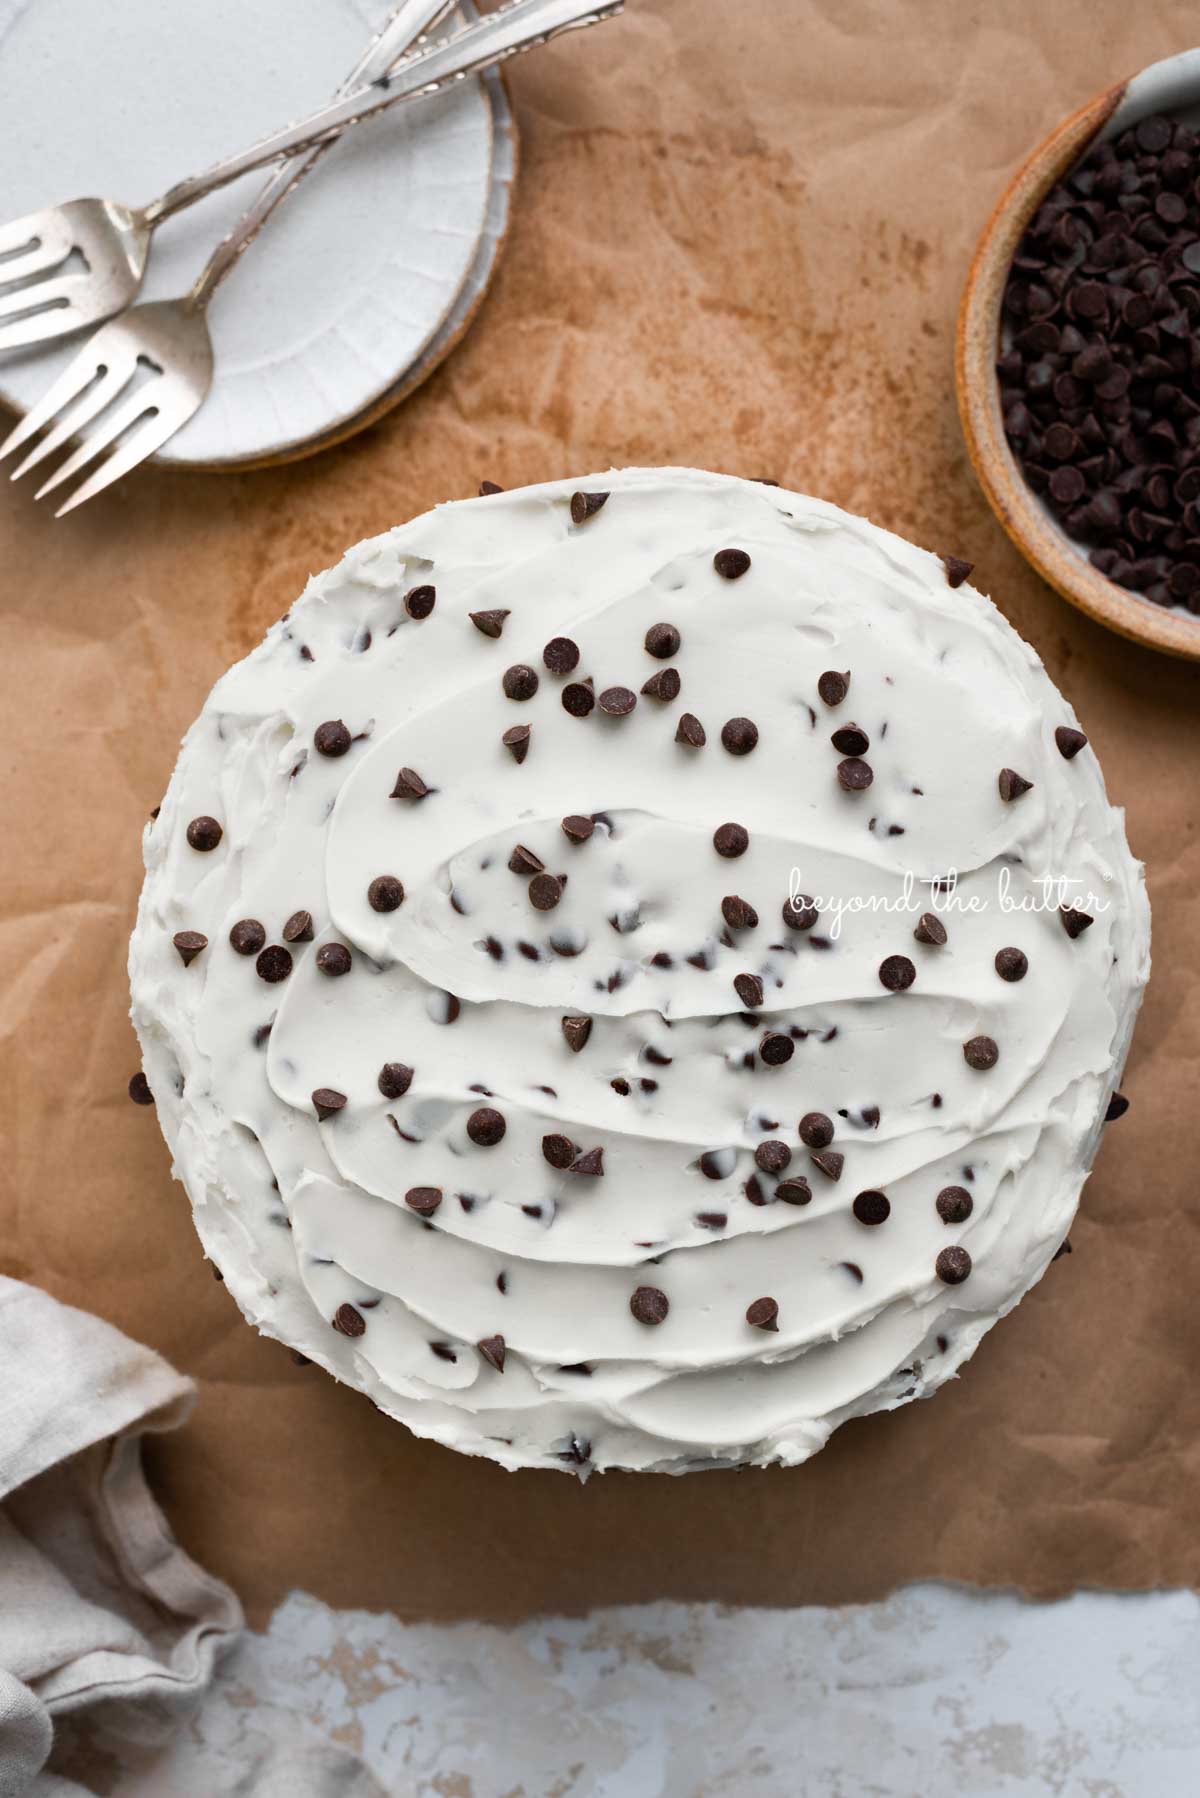 Chocolate chip cake frosted with chocolate chip buttercream frosting with dessert plates, forks, a bowl of chocolate chips, and a napkin on a brown paper background | © Beyond the Butter®